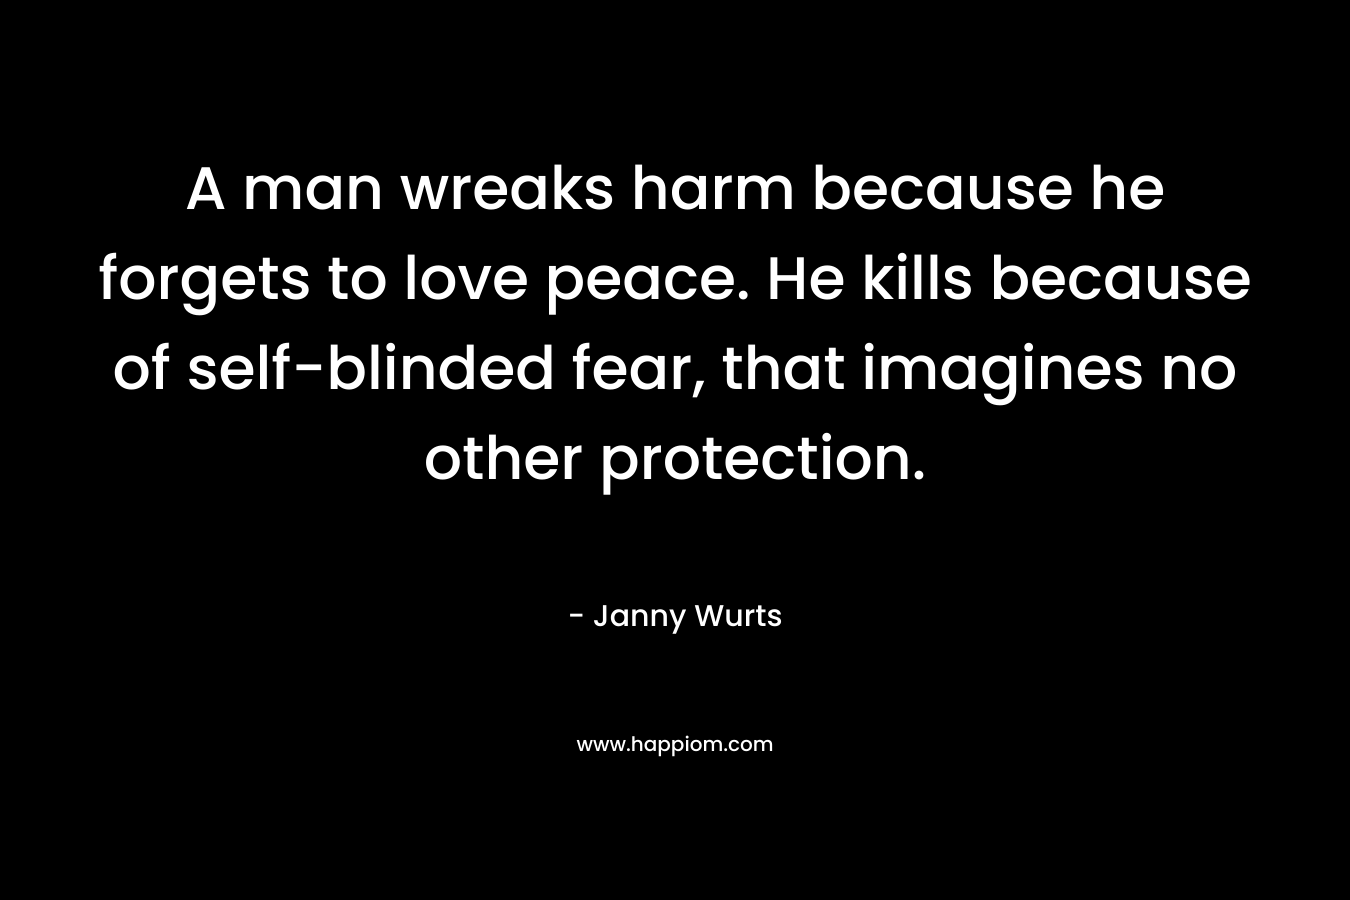 A man wreaks harm because he forgets to love peace. He kills because of self-blinded fear, that imagines no other protection.